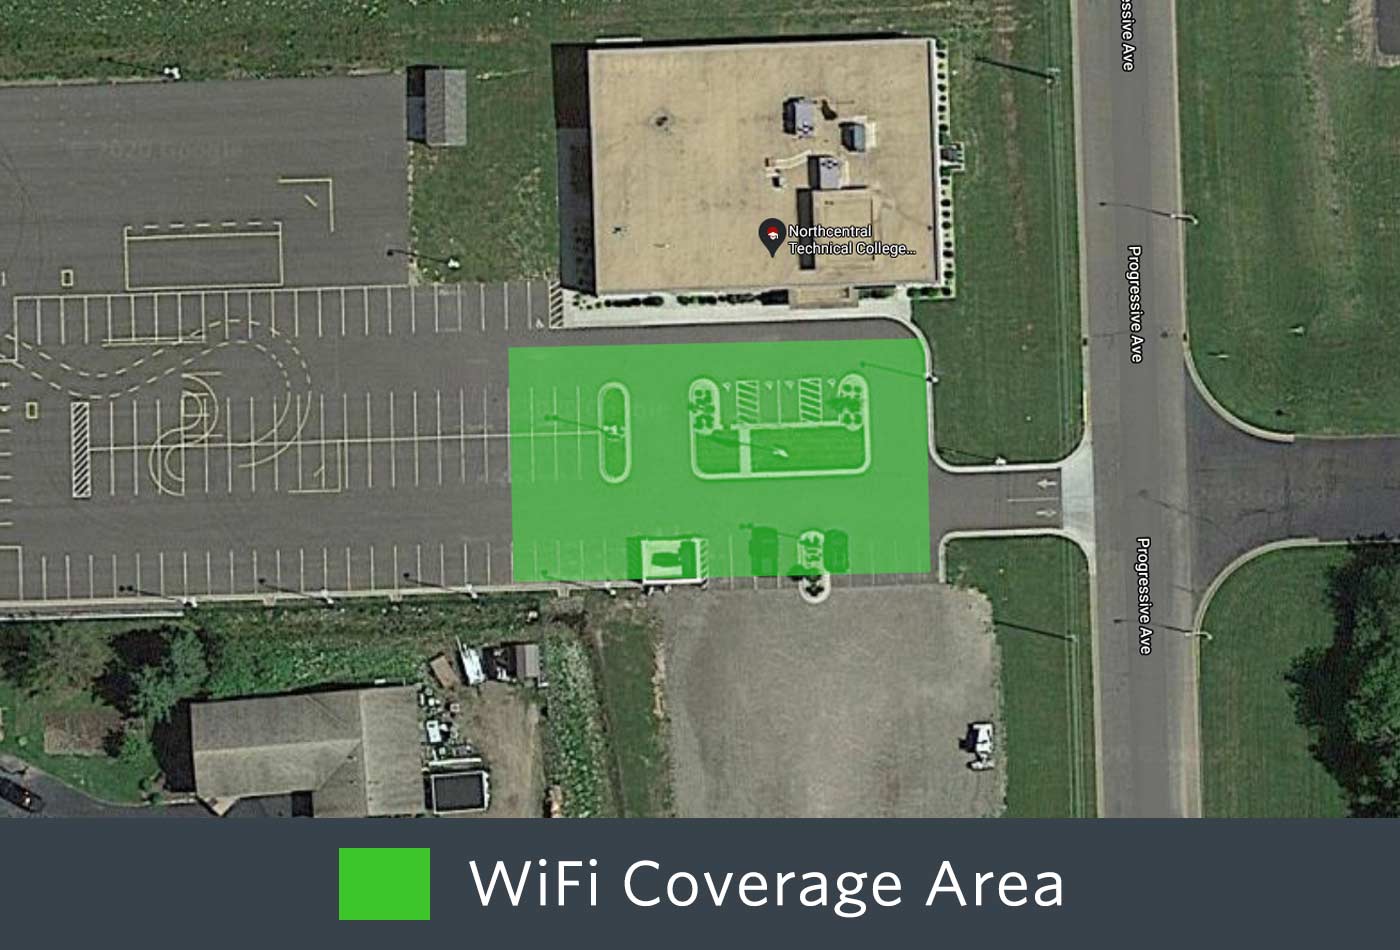 Outdoor WiFi coverage of the front of the Medford Campus